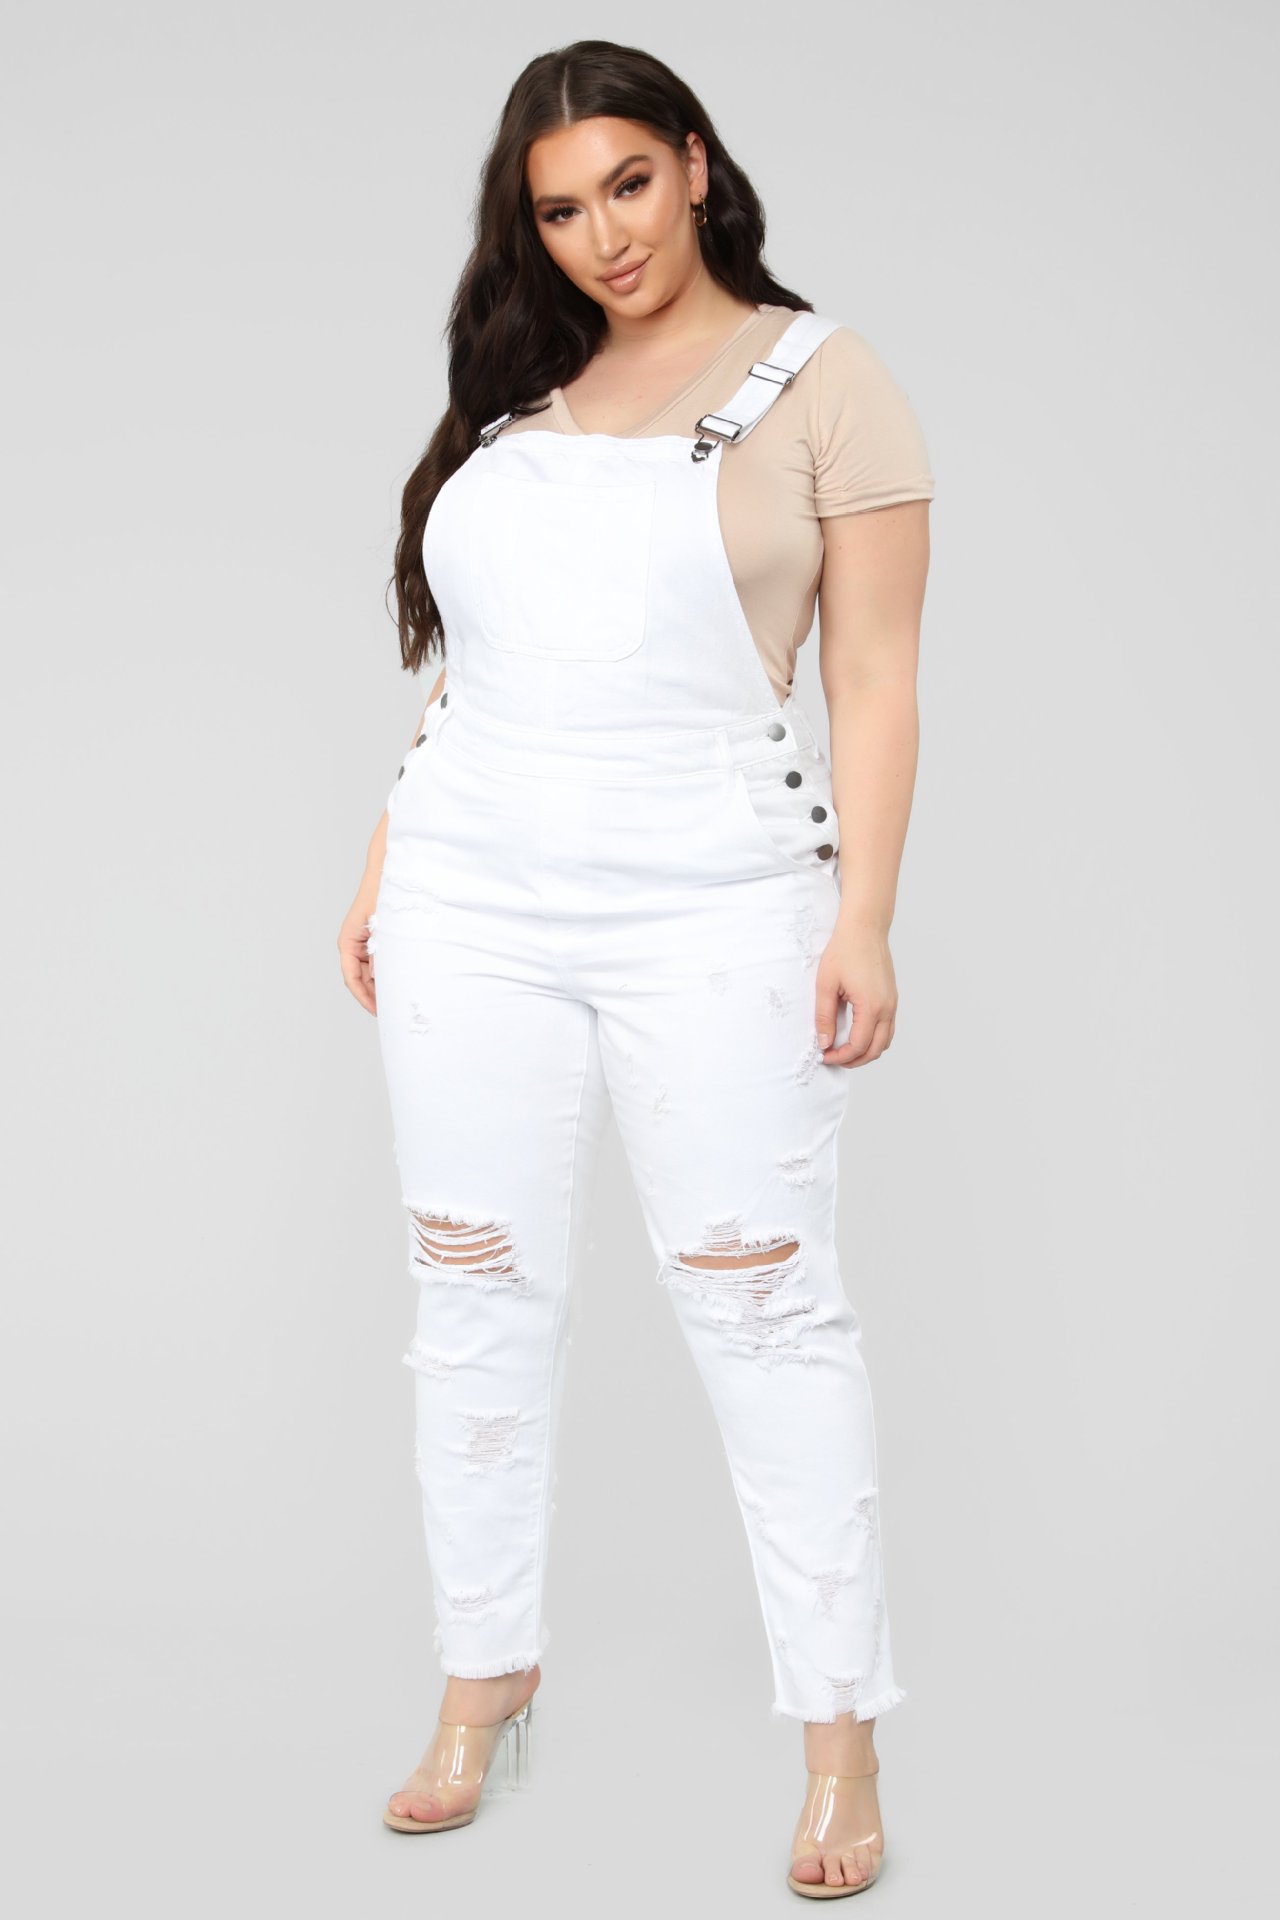 Women Jumpsuit Large Size Denim Ripped White High Street Plus Size Jumpsuit Vintage Party Slim Lady Belted Mono